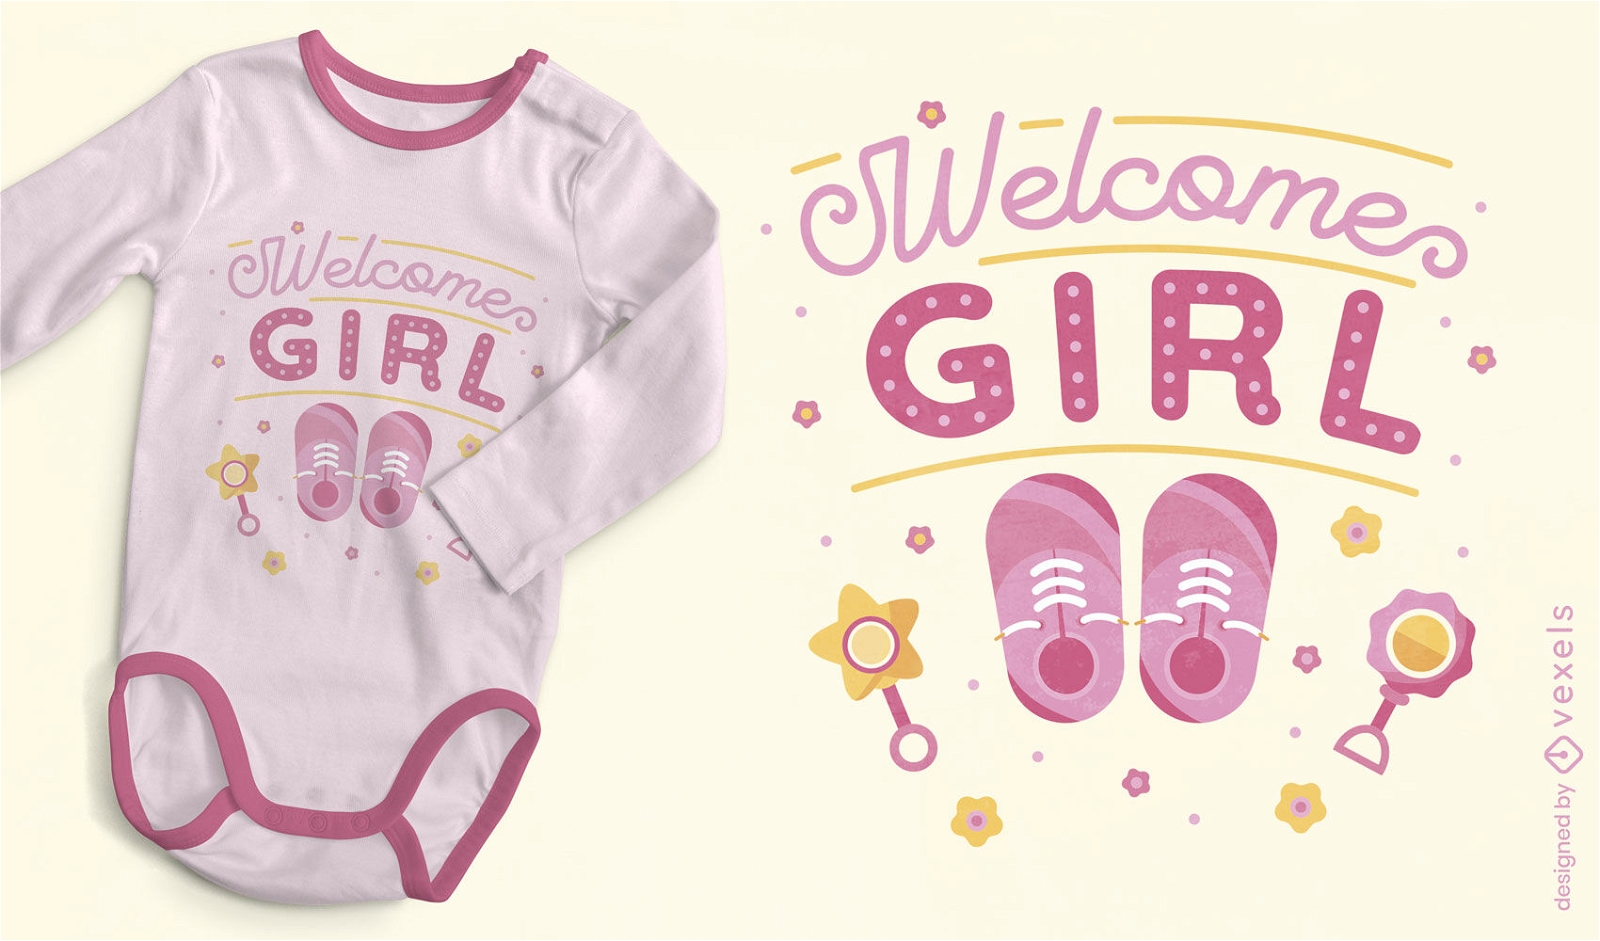 Welcome baby girl t-shirt design